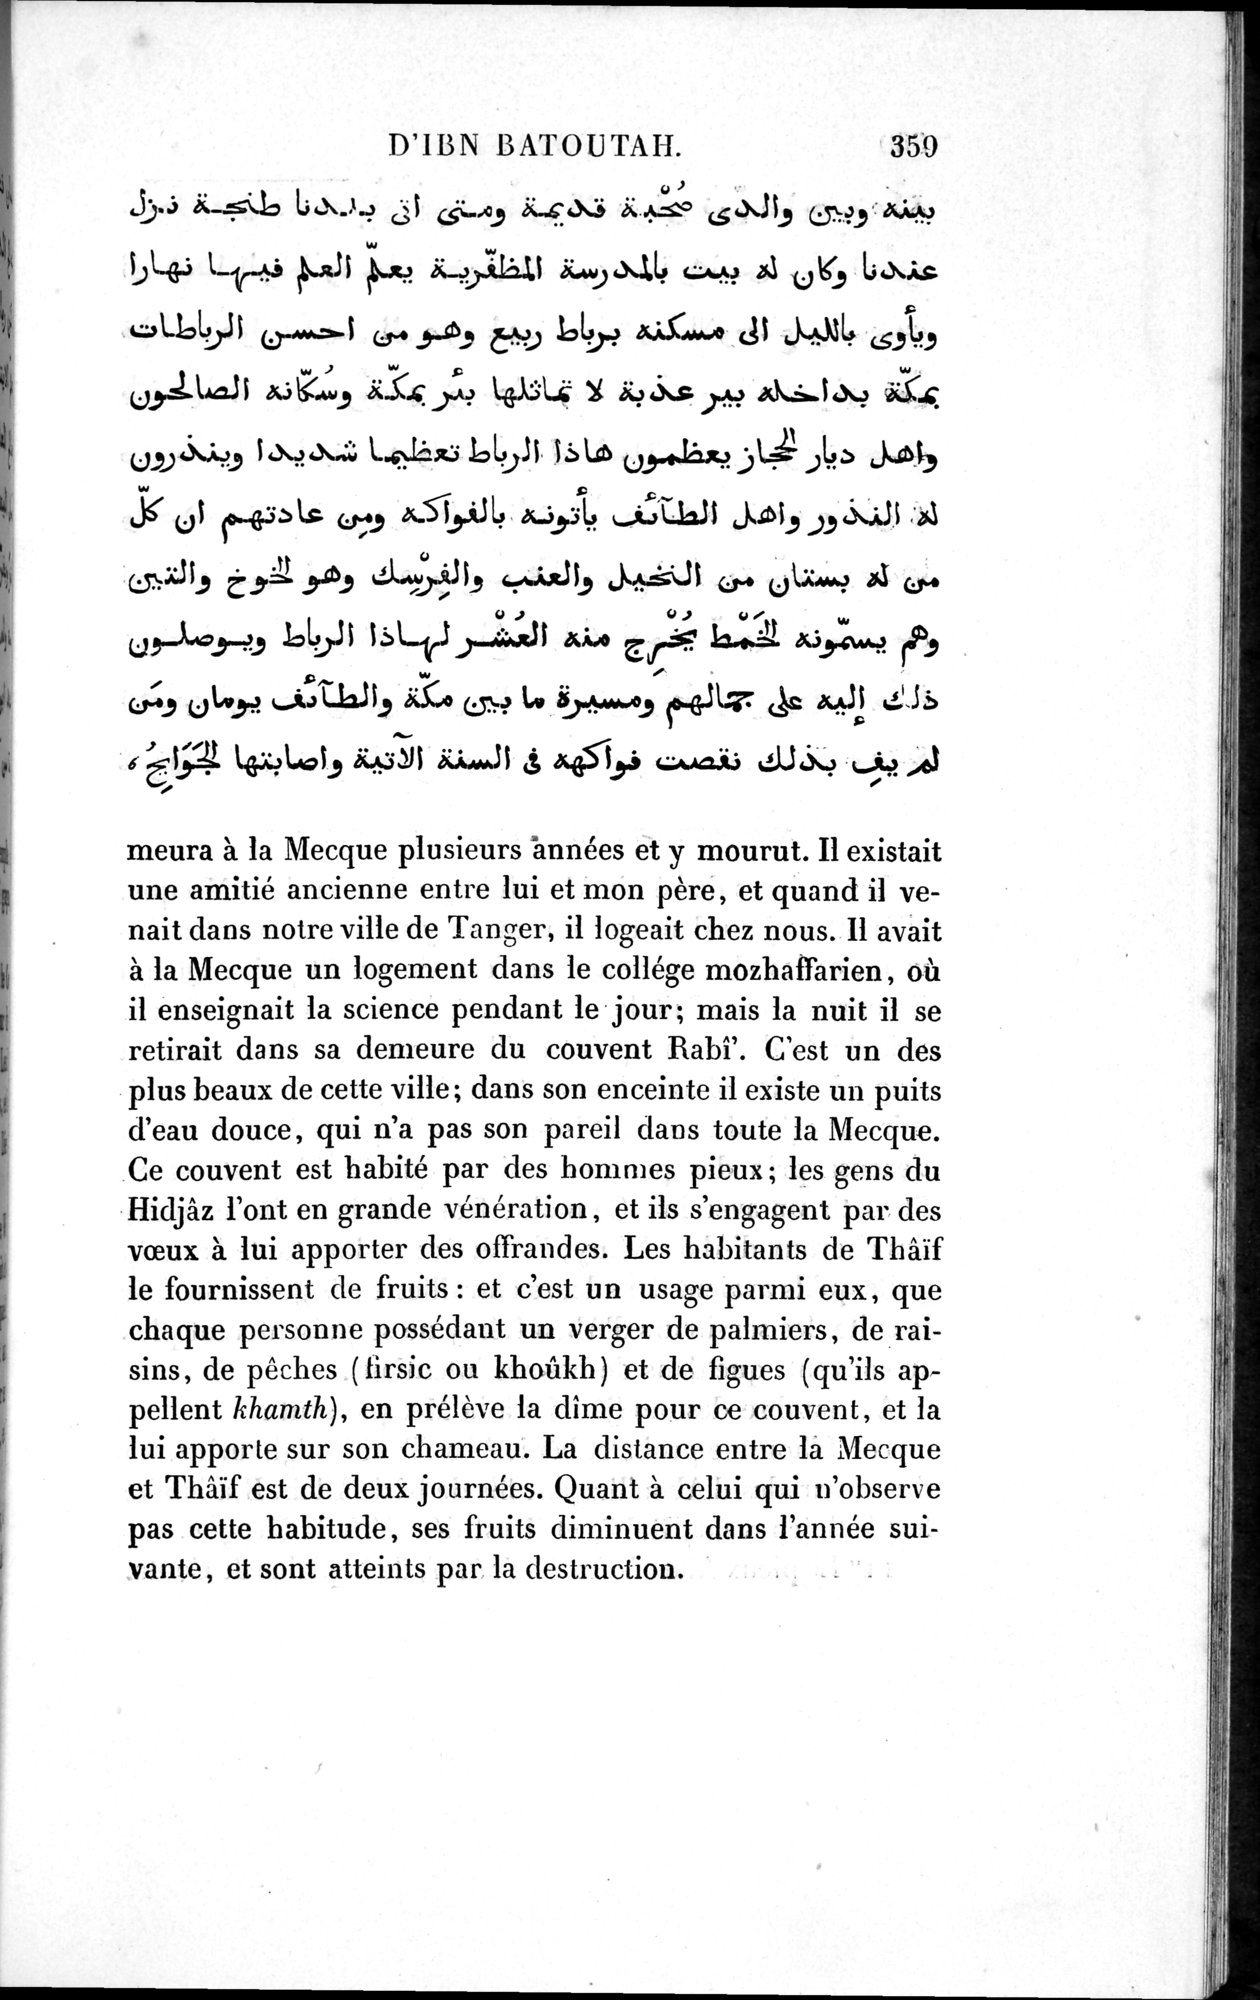 Voyages d'Ibn Batoutah : vol.1 / Page 419 (Grayscale High Resolution Image)